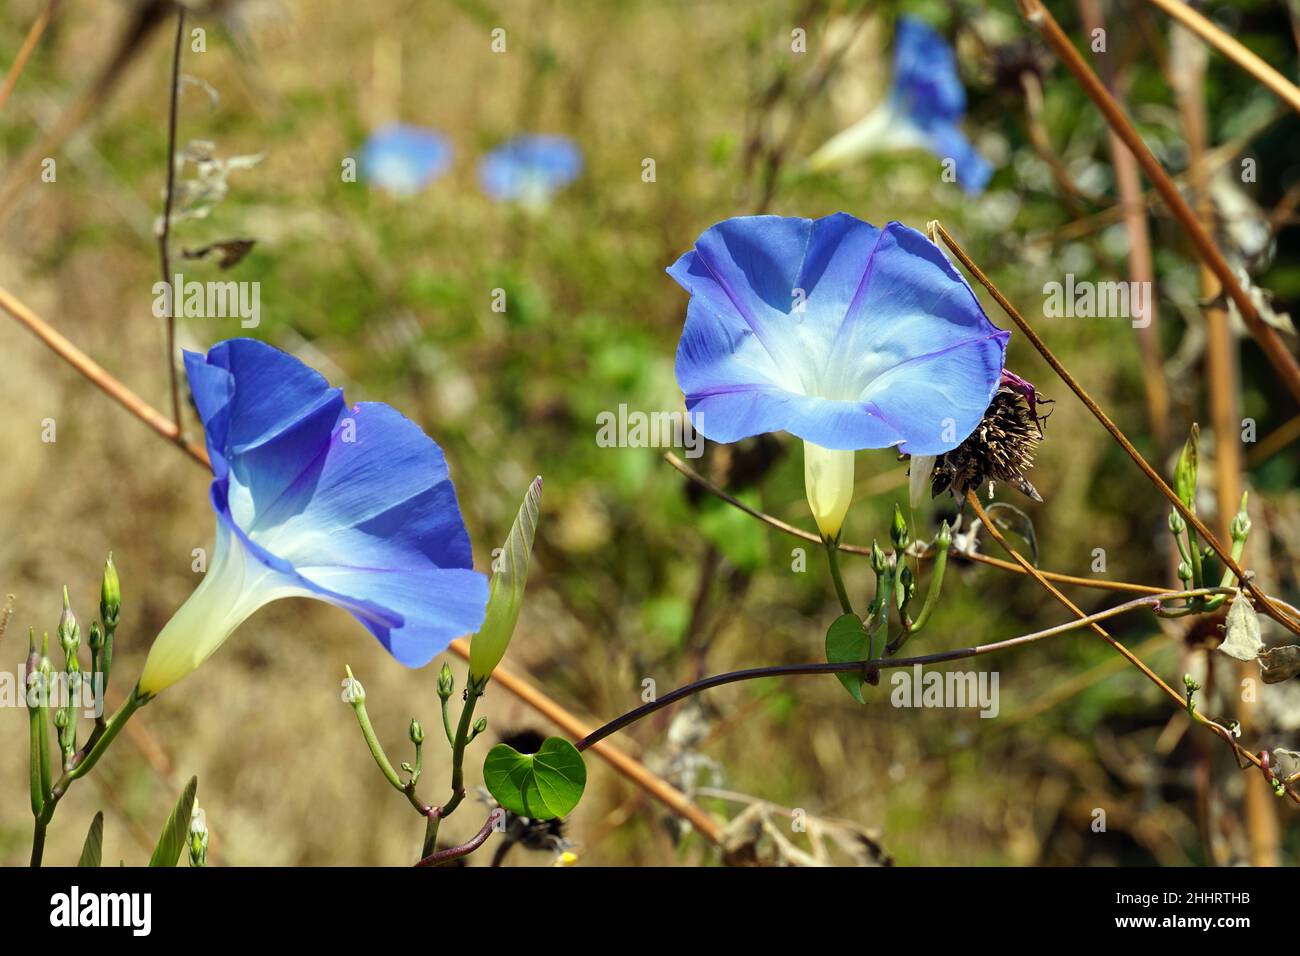 Mexican morning glory or just morning glory, Himmelblaue Prunkwinde, Kaiserwinde, Ipomoea tricolor, kék hajnalka, Mexico, North America Stock Photo